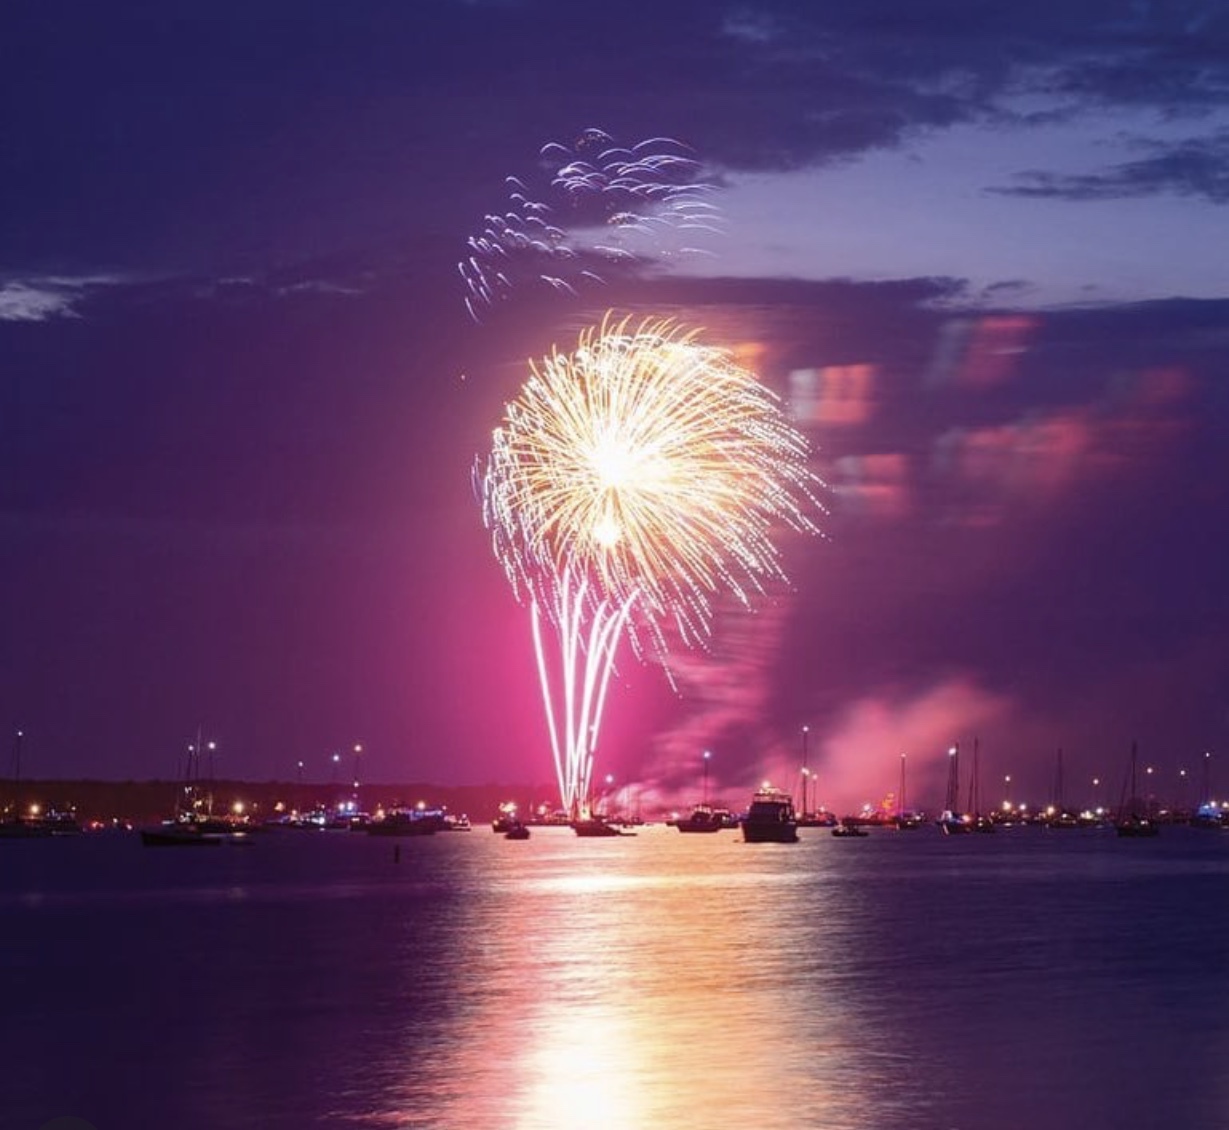 On Saturday, July 16, EHP Resort & Marina's Sí Sí, restaurant in East Hampton will be the place to enjoy dinner while watching the fireworks show over Three Mile Harbor. COURTESY CLAMSHELL FOUNDATION